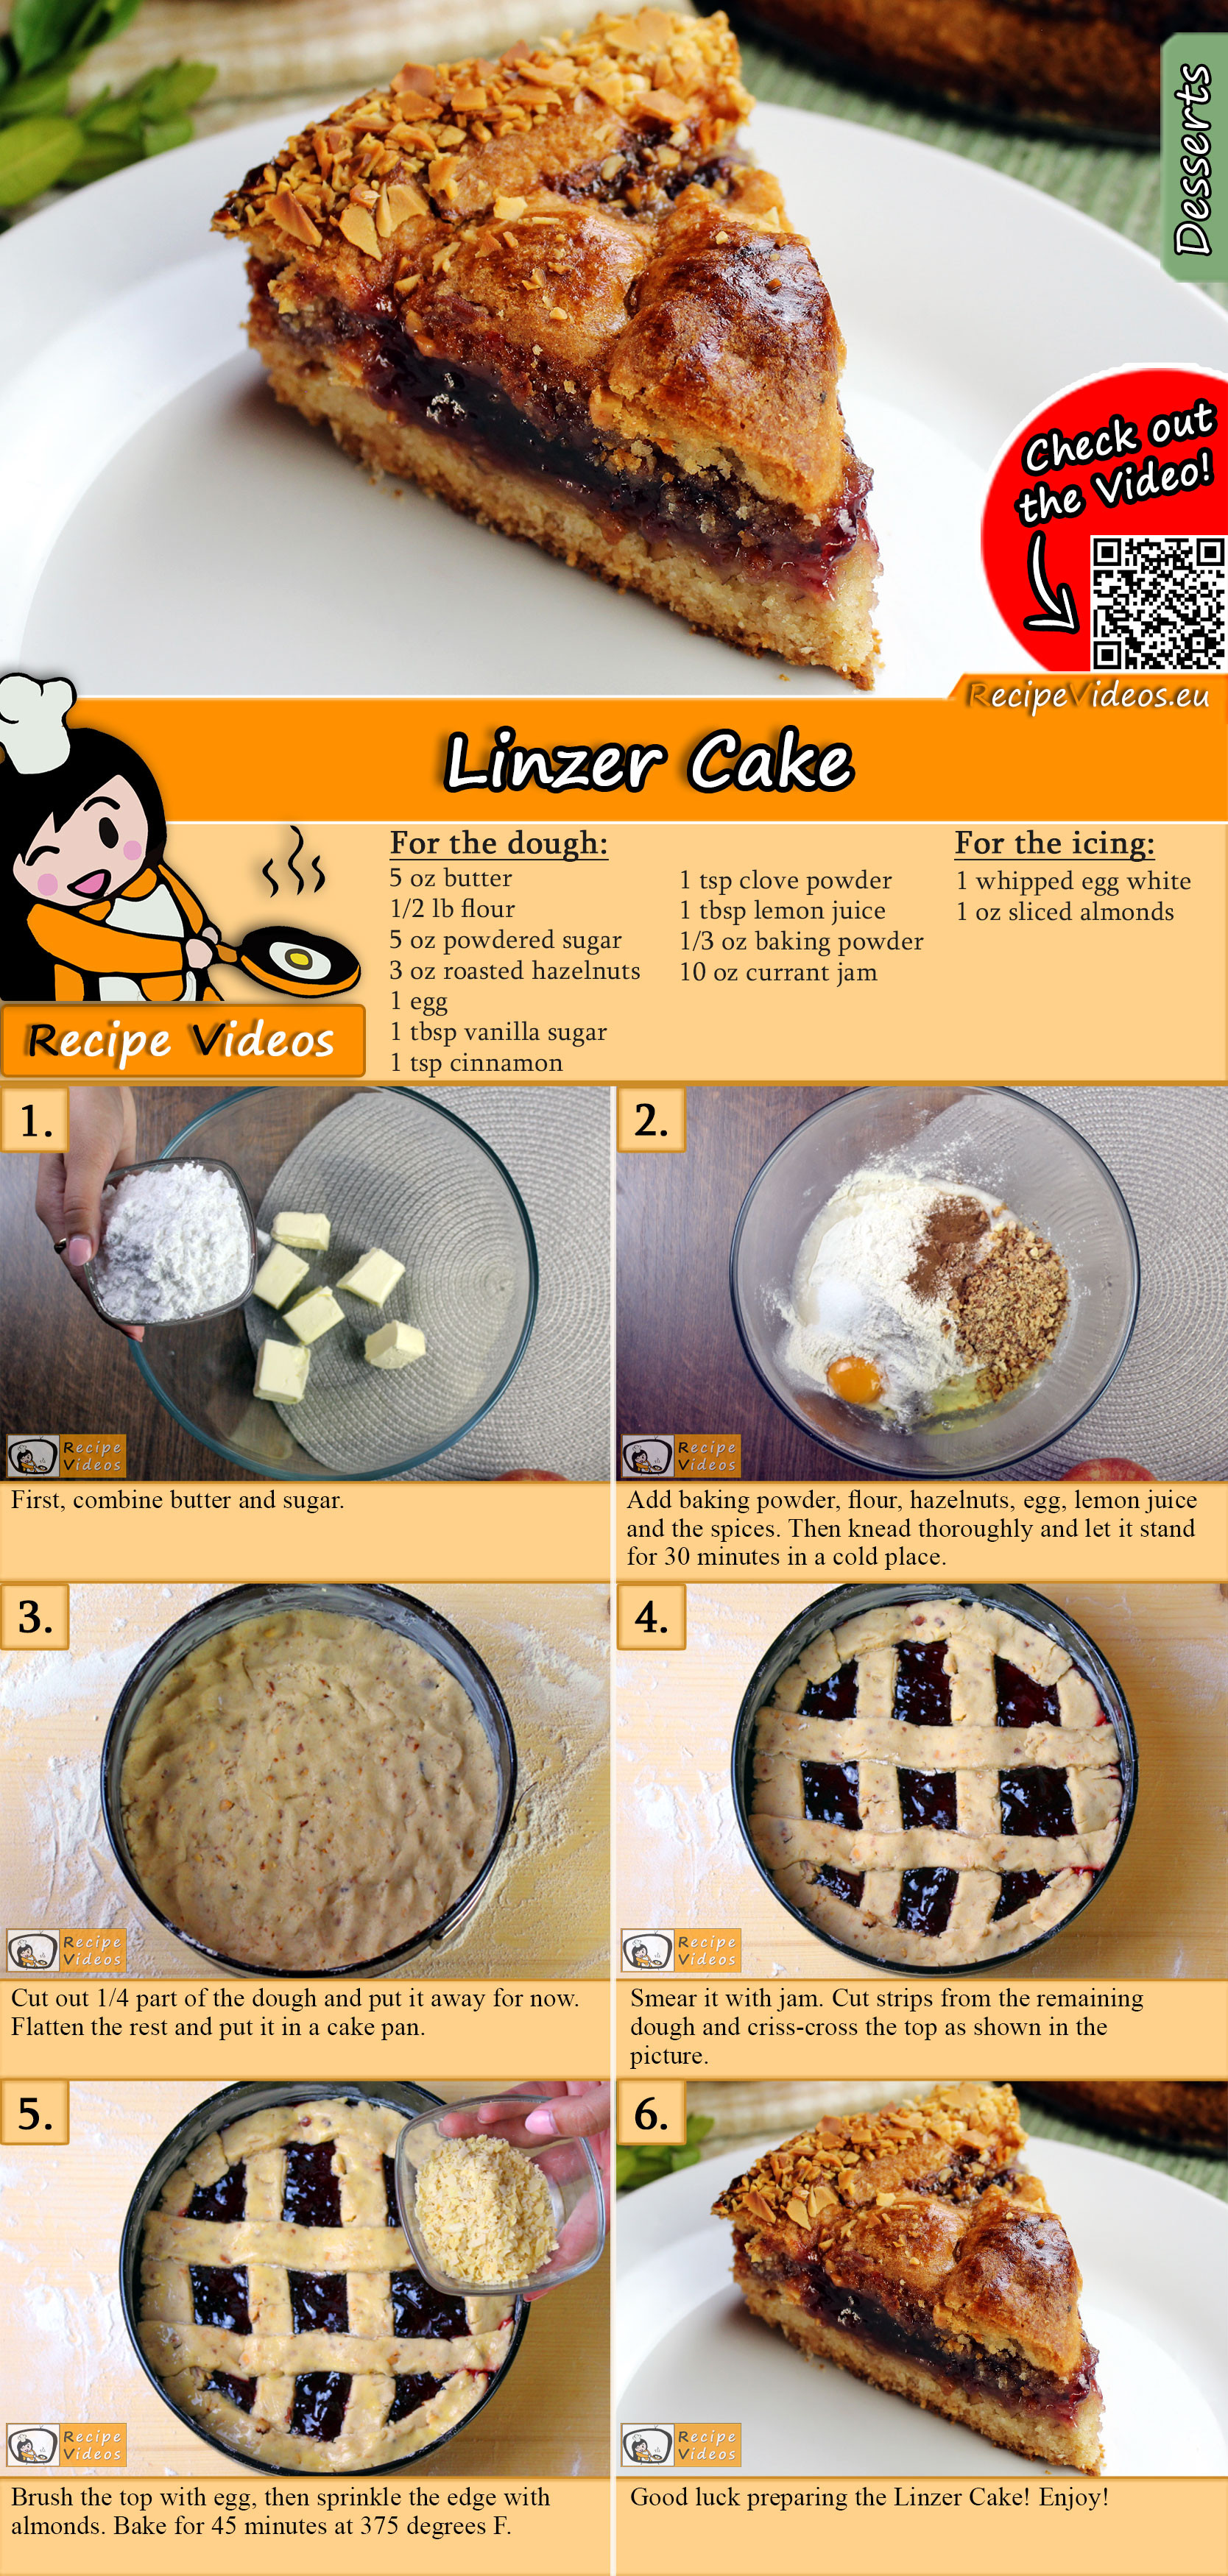 Linzer Cake recipe with video